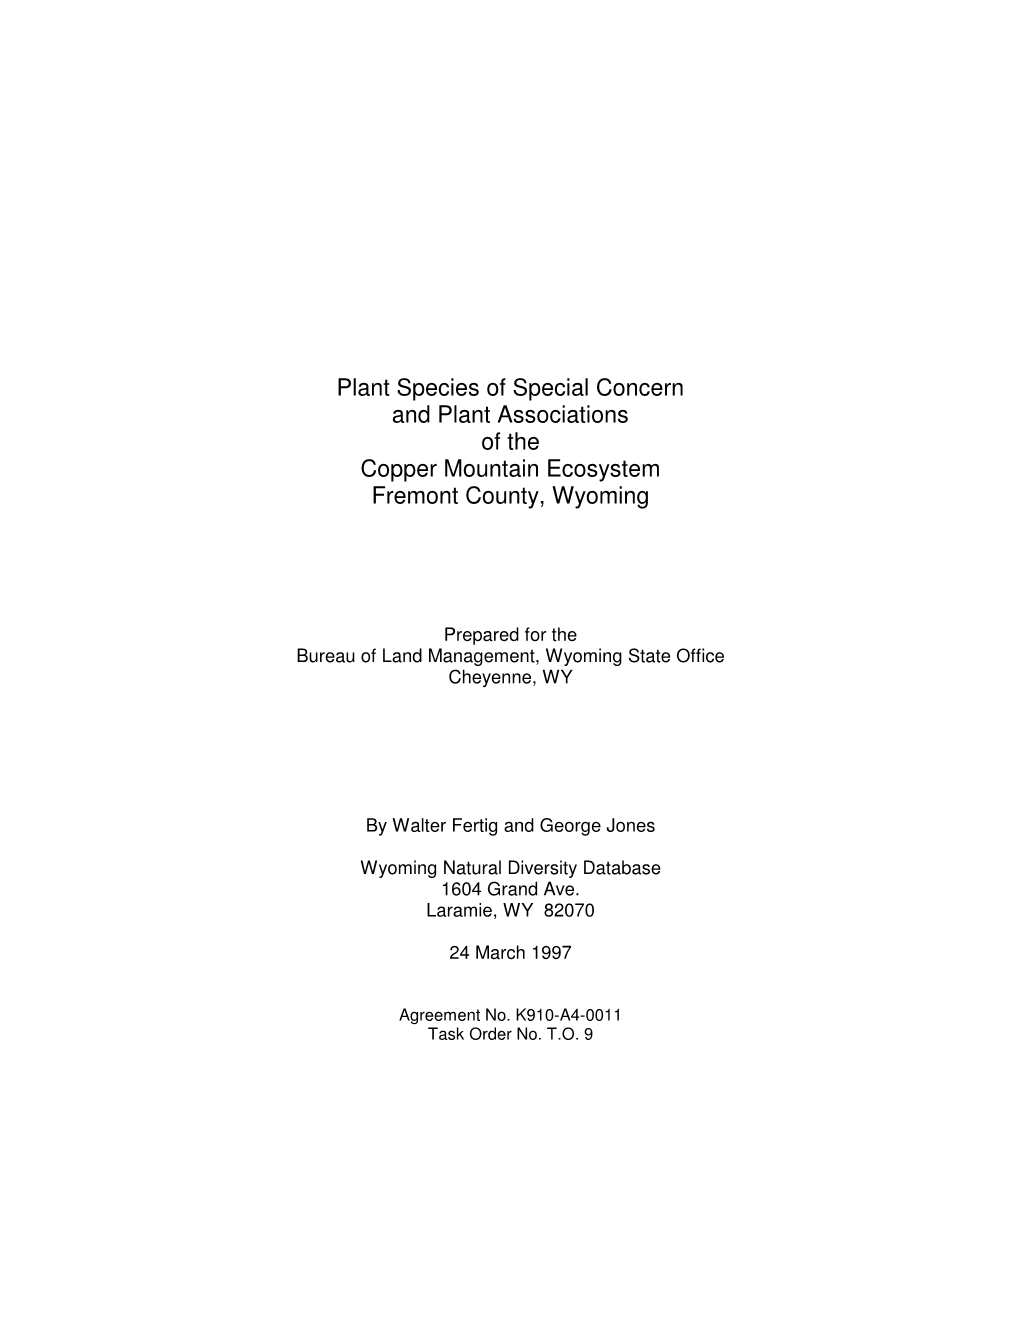 Plant Species of Special Concern and Plant Associations of the Copper Mountain Ecosystem Fremont County, Wyoming